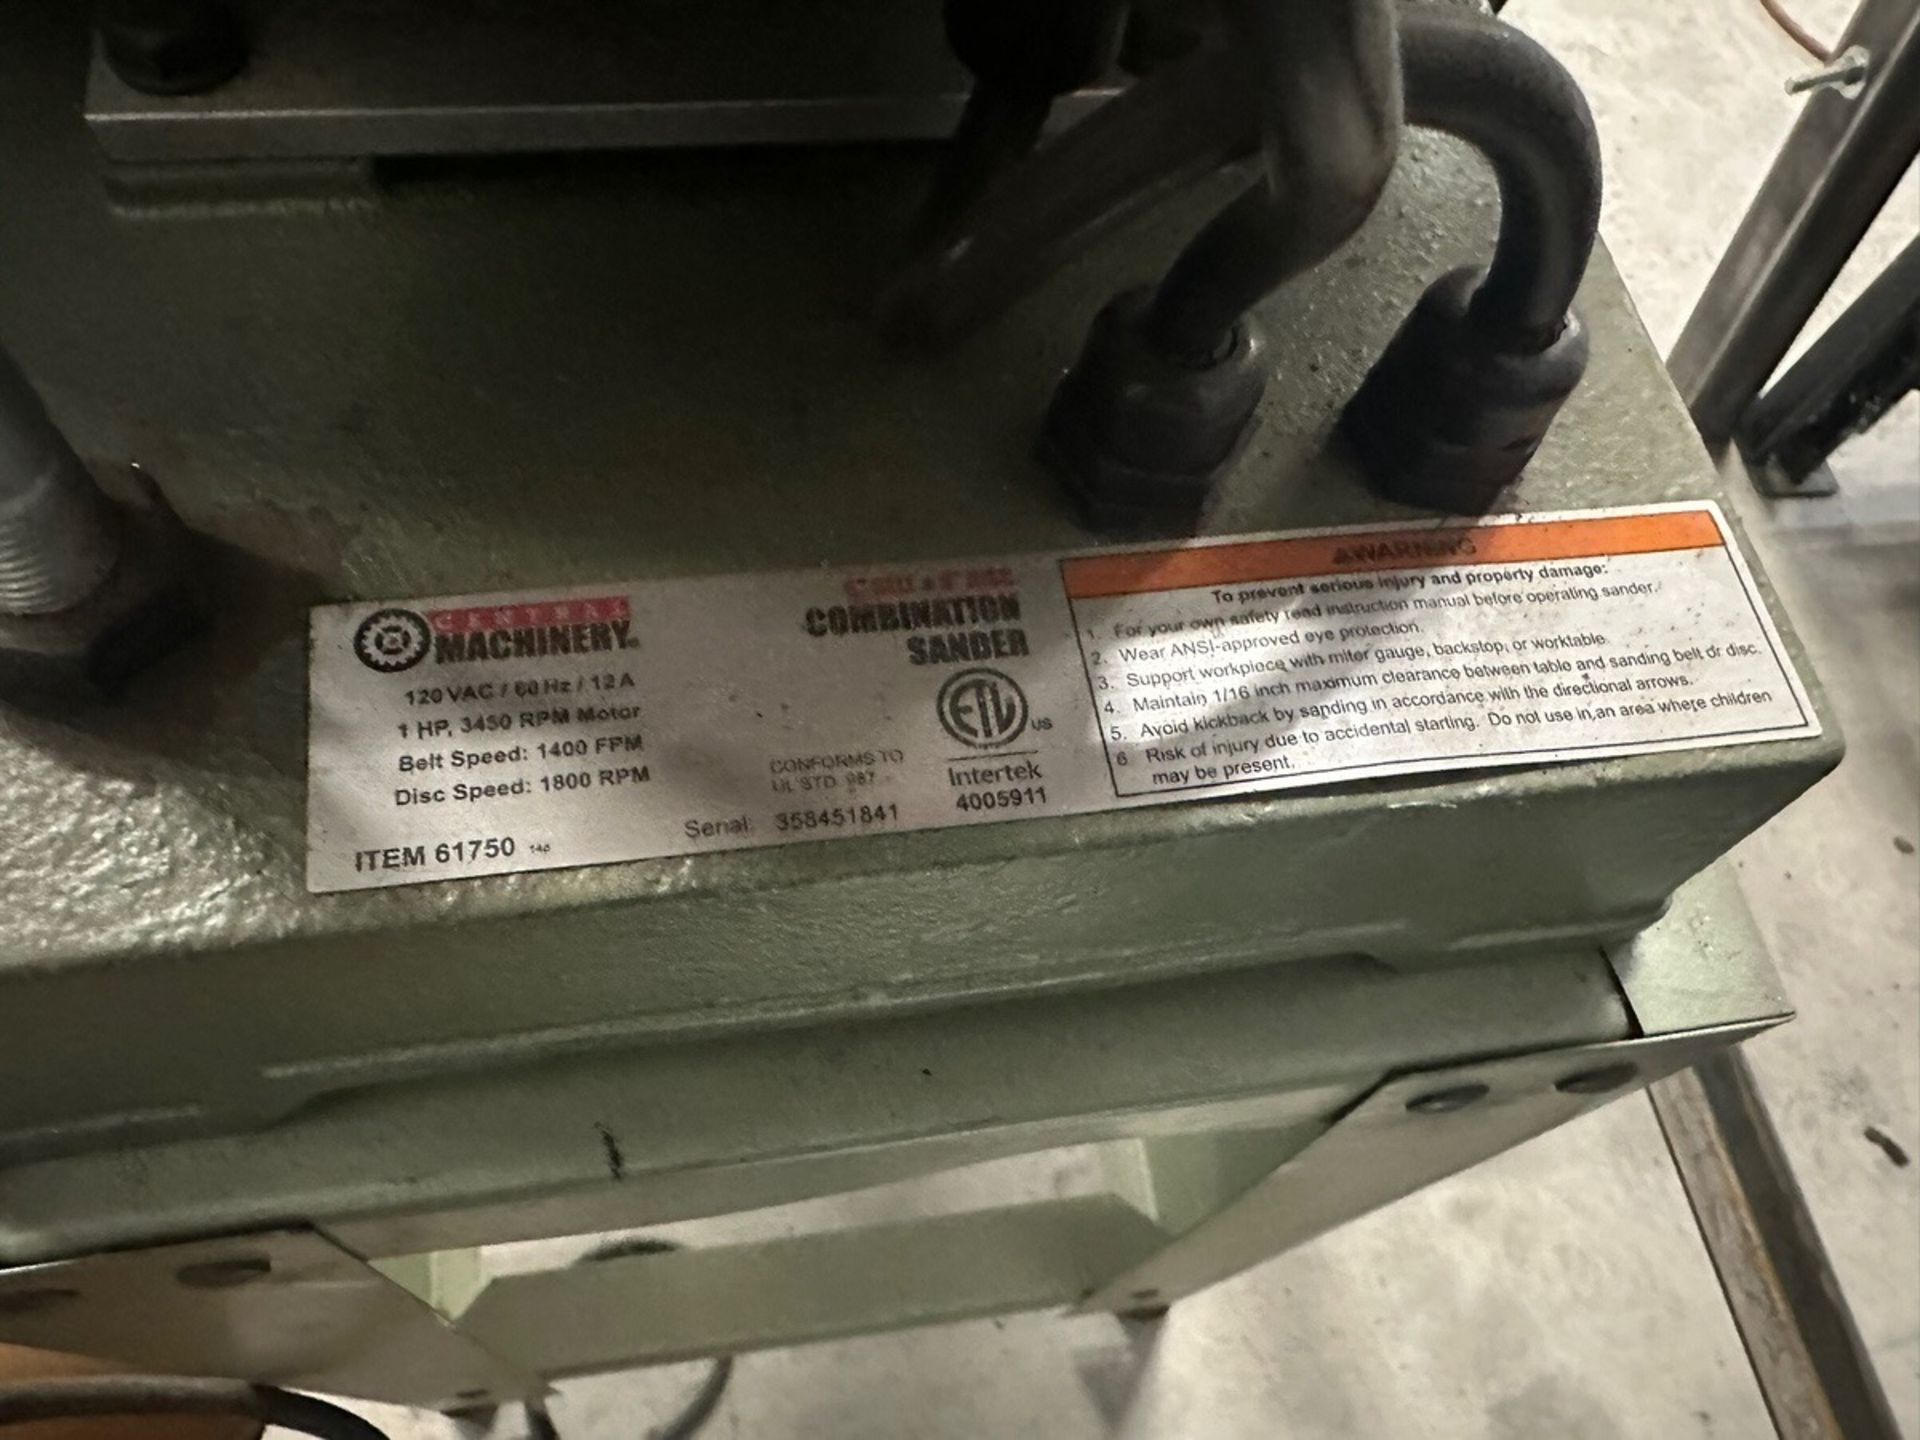 Central Machinery, Combination Sander, Item 61750, S/N 358451841 | Rig Fee $35 - Image 4 of 4